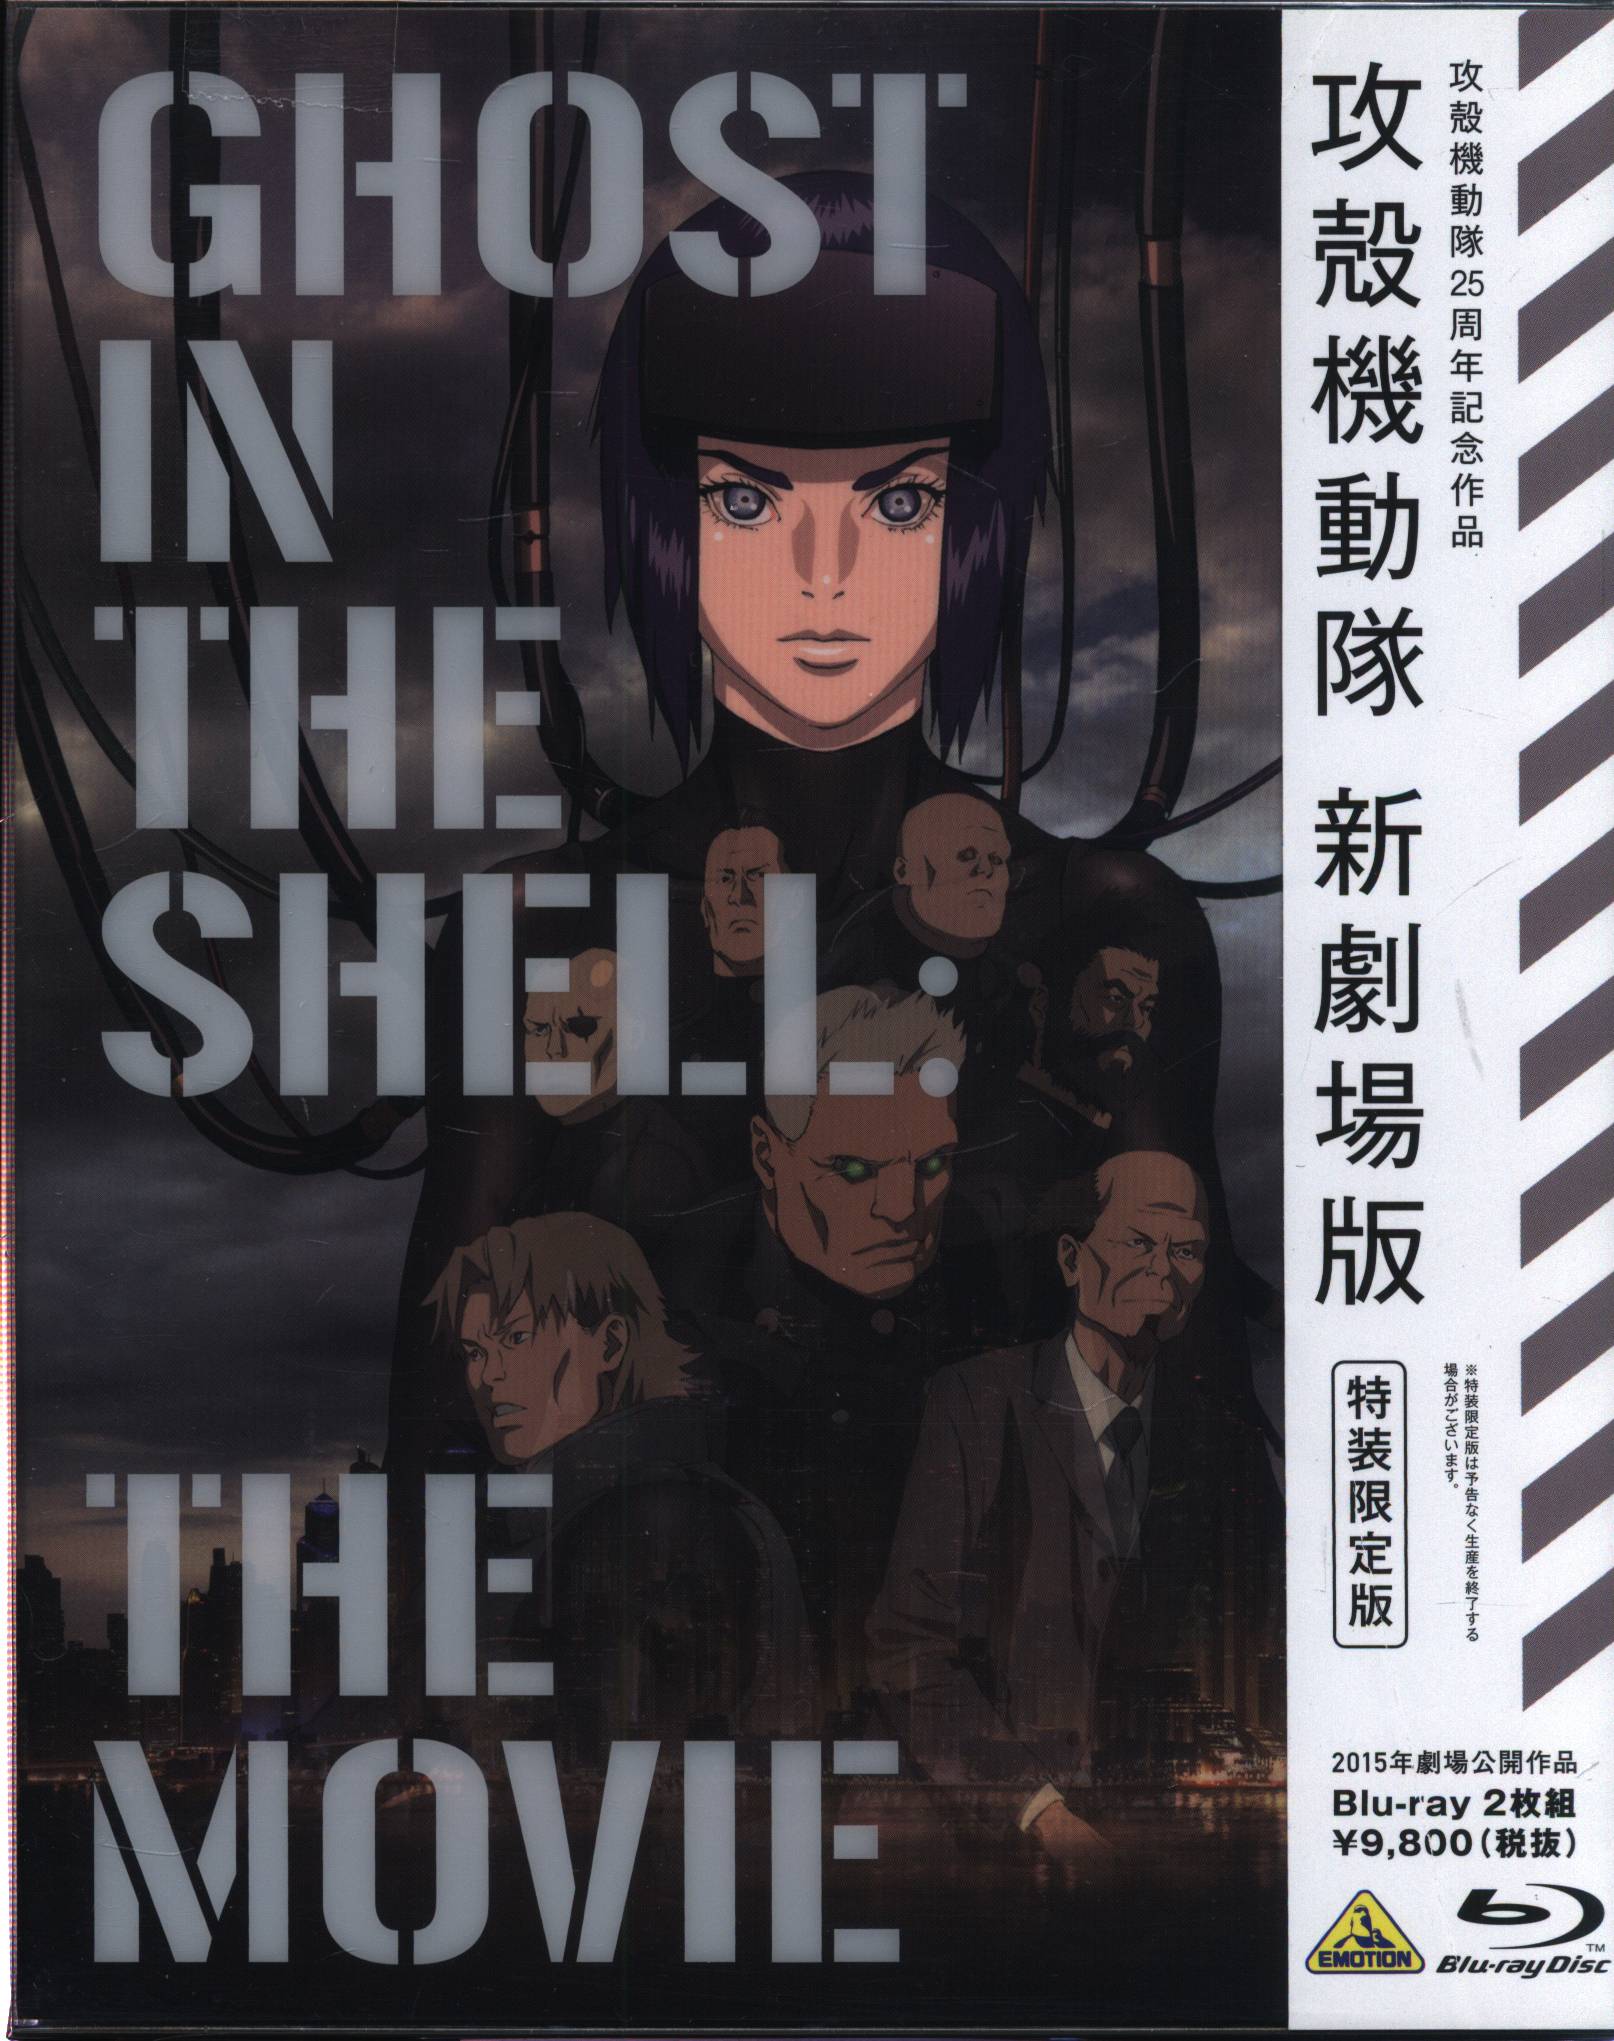 GHOST IN THE SHELL 攻殻機動隊スチールブック仕様 - アニメ